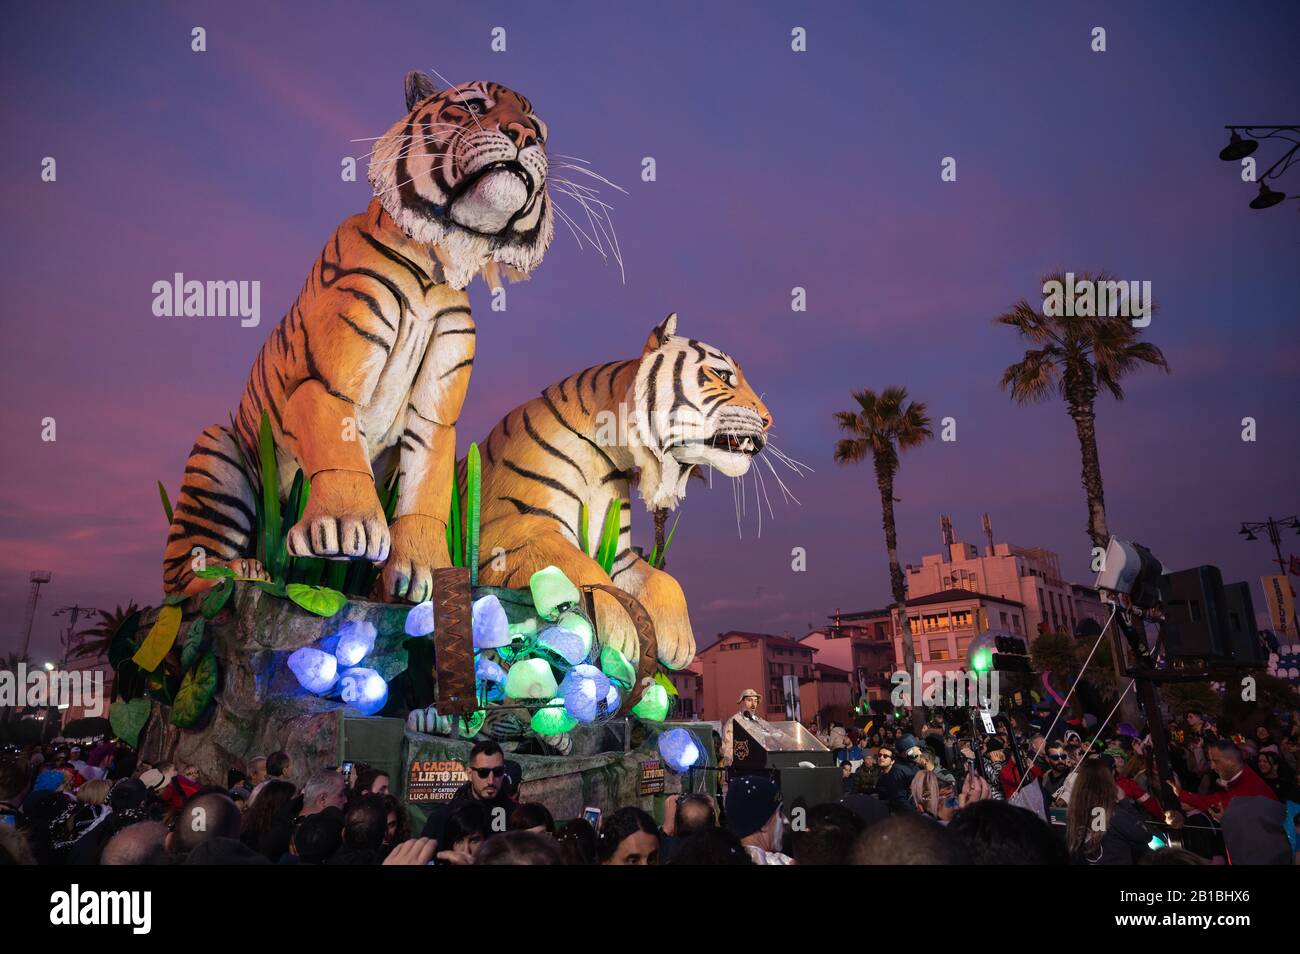 Parade of the Viareggio carnival on the waterfront of the city of Ciareggio (Lucca), Italy on Feb 23. 2020, the large papier-mâché floats represent famous politicians and sportsmen. (Photo by Stefano Dalle Luche / Pacific Press/Sipa USA) Stock Photo